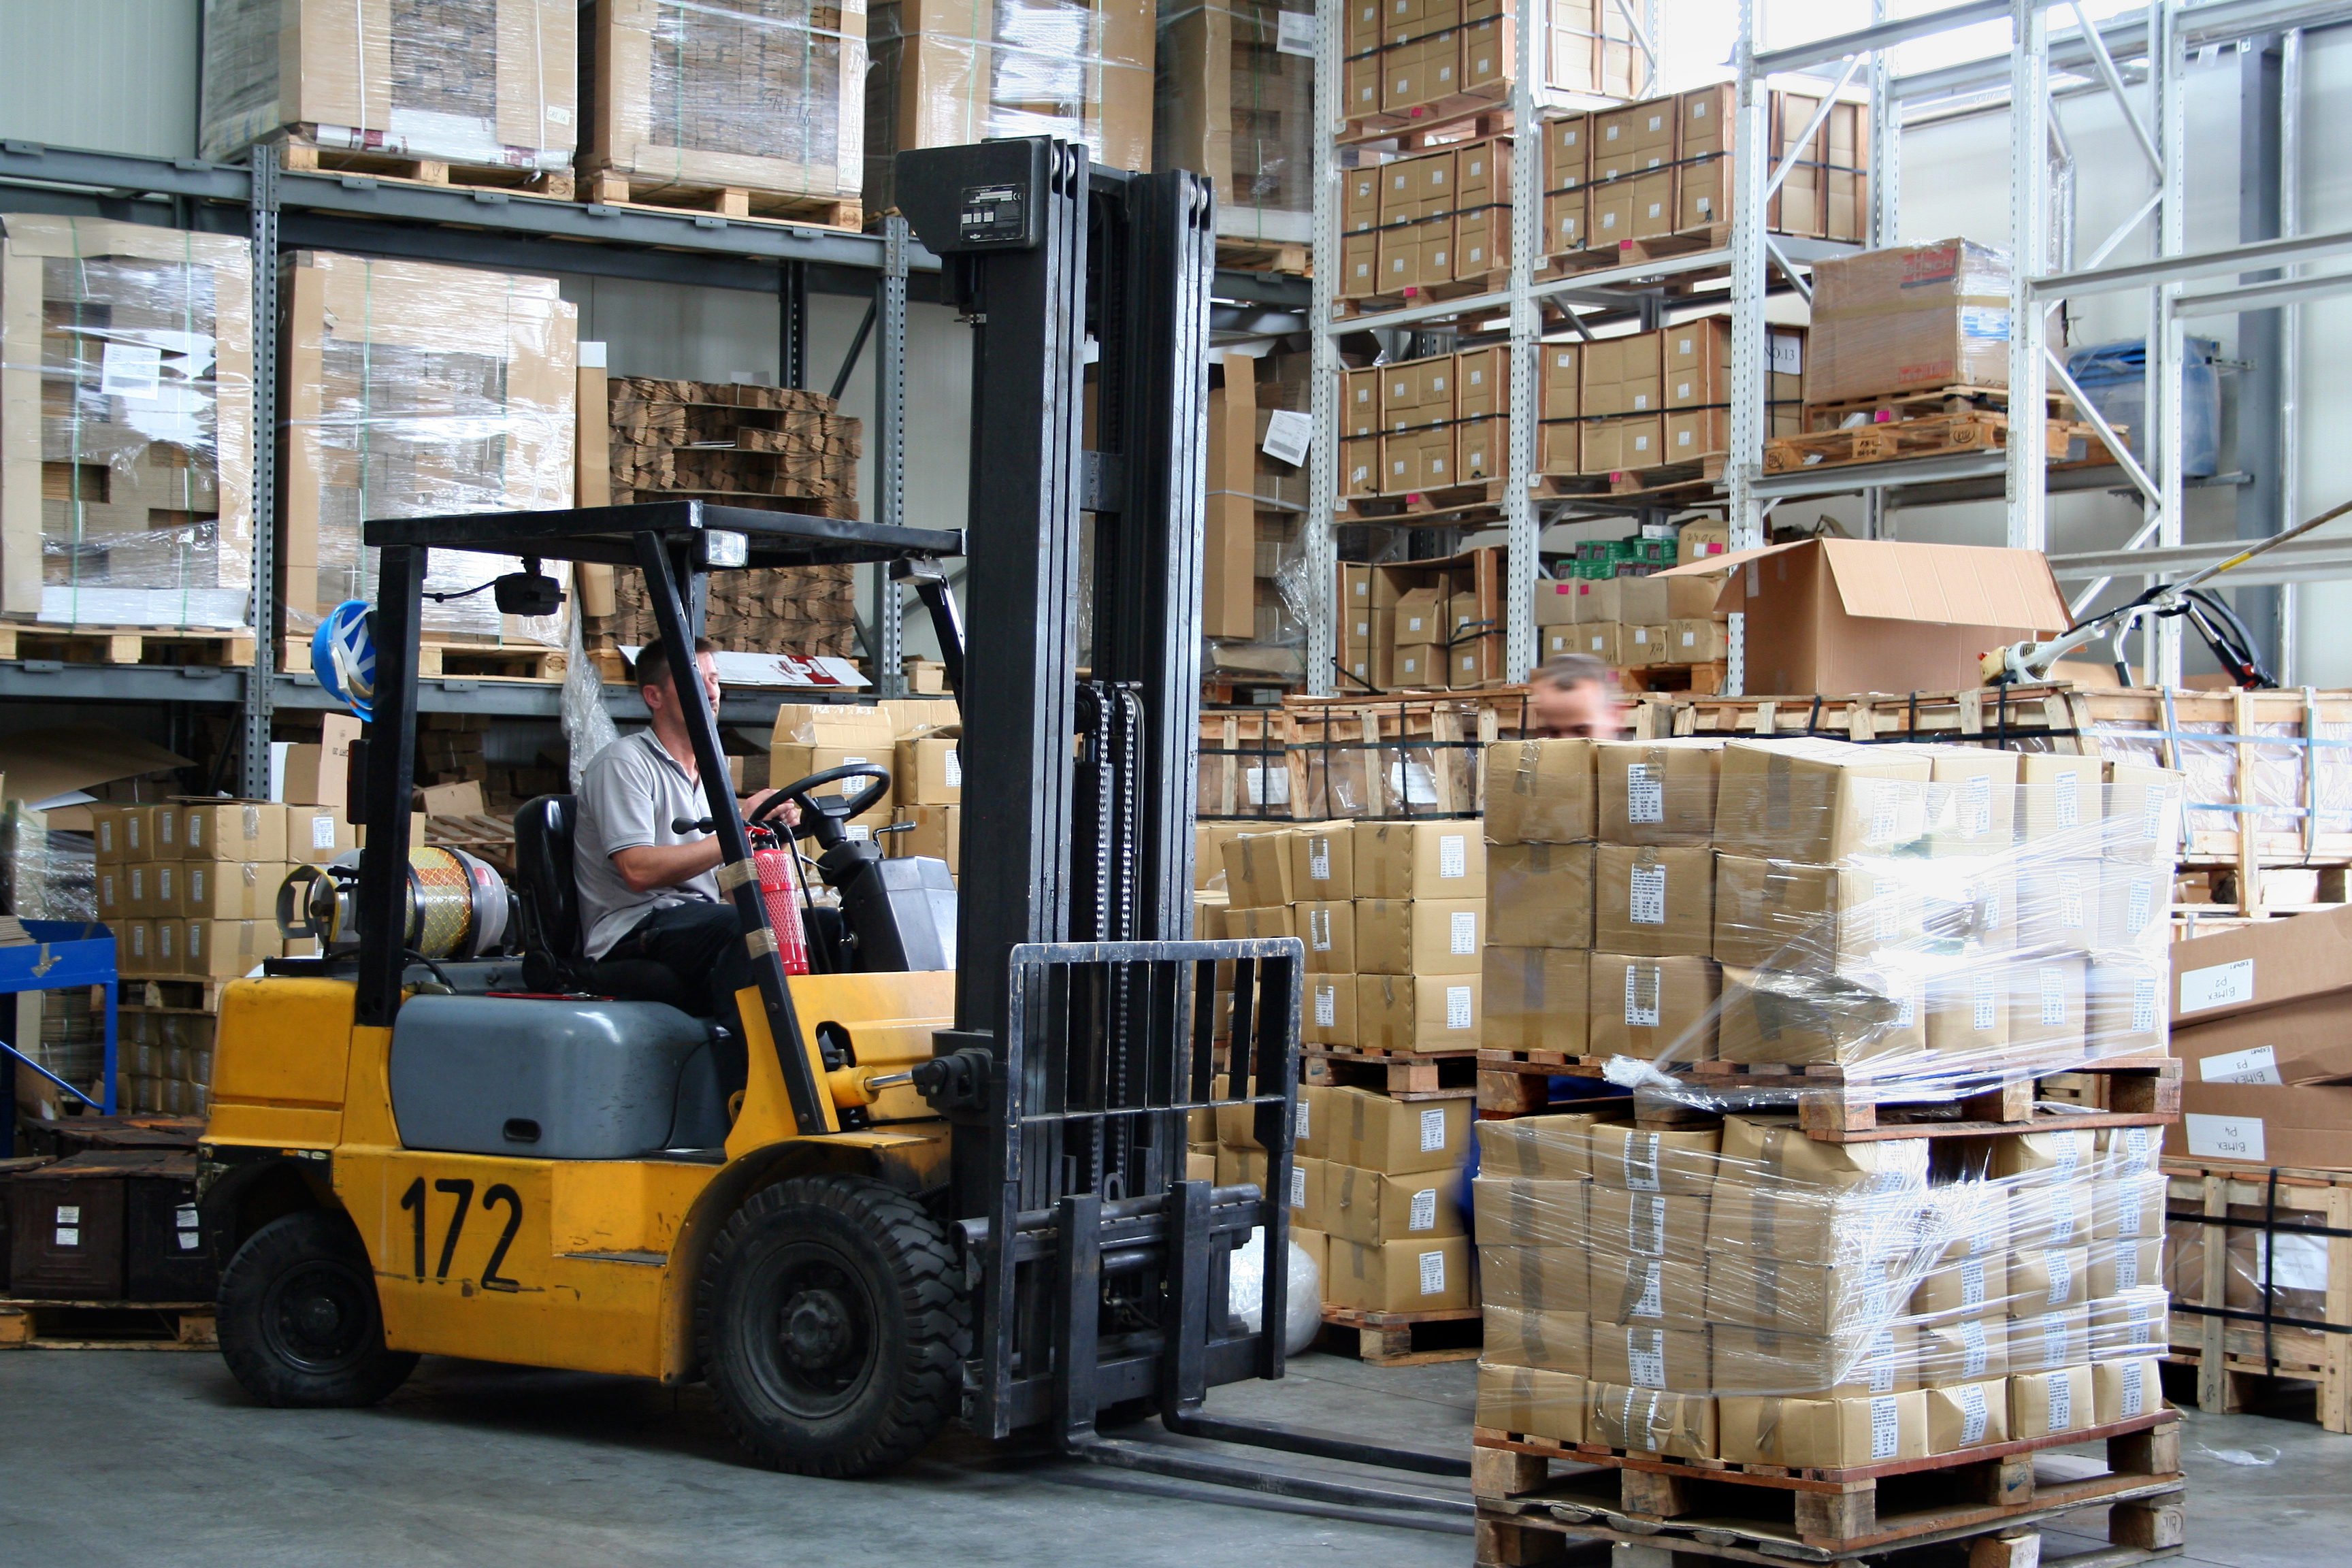 Tips for Conducting Your Next Forklift Safety Inspection